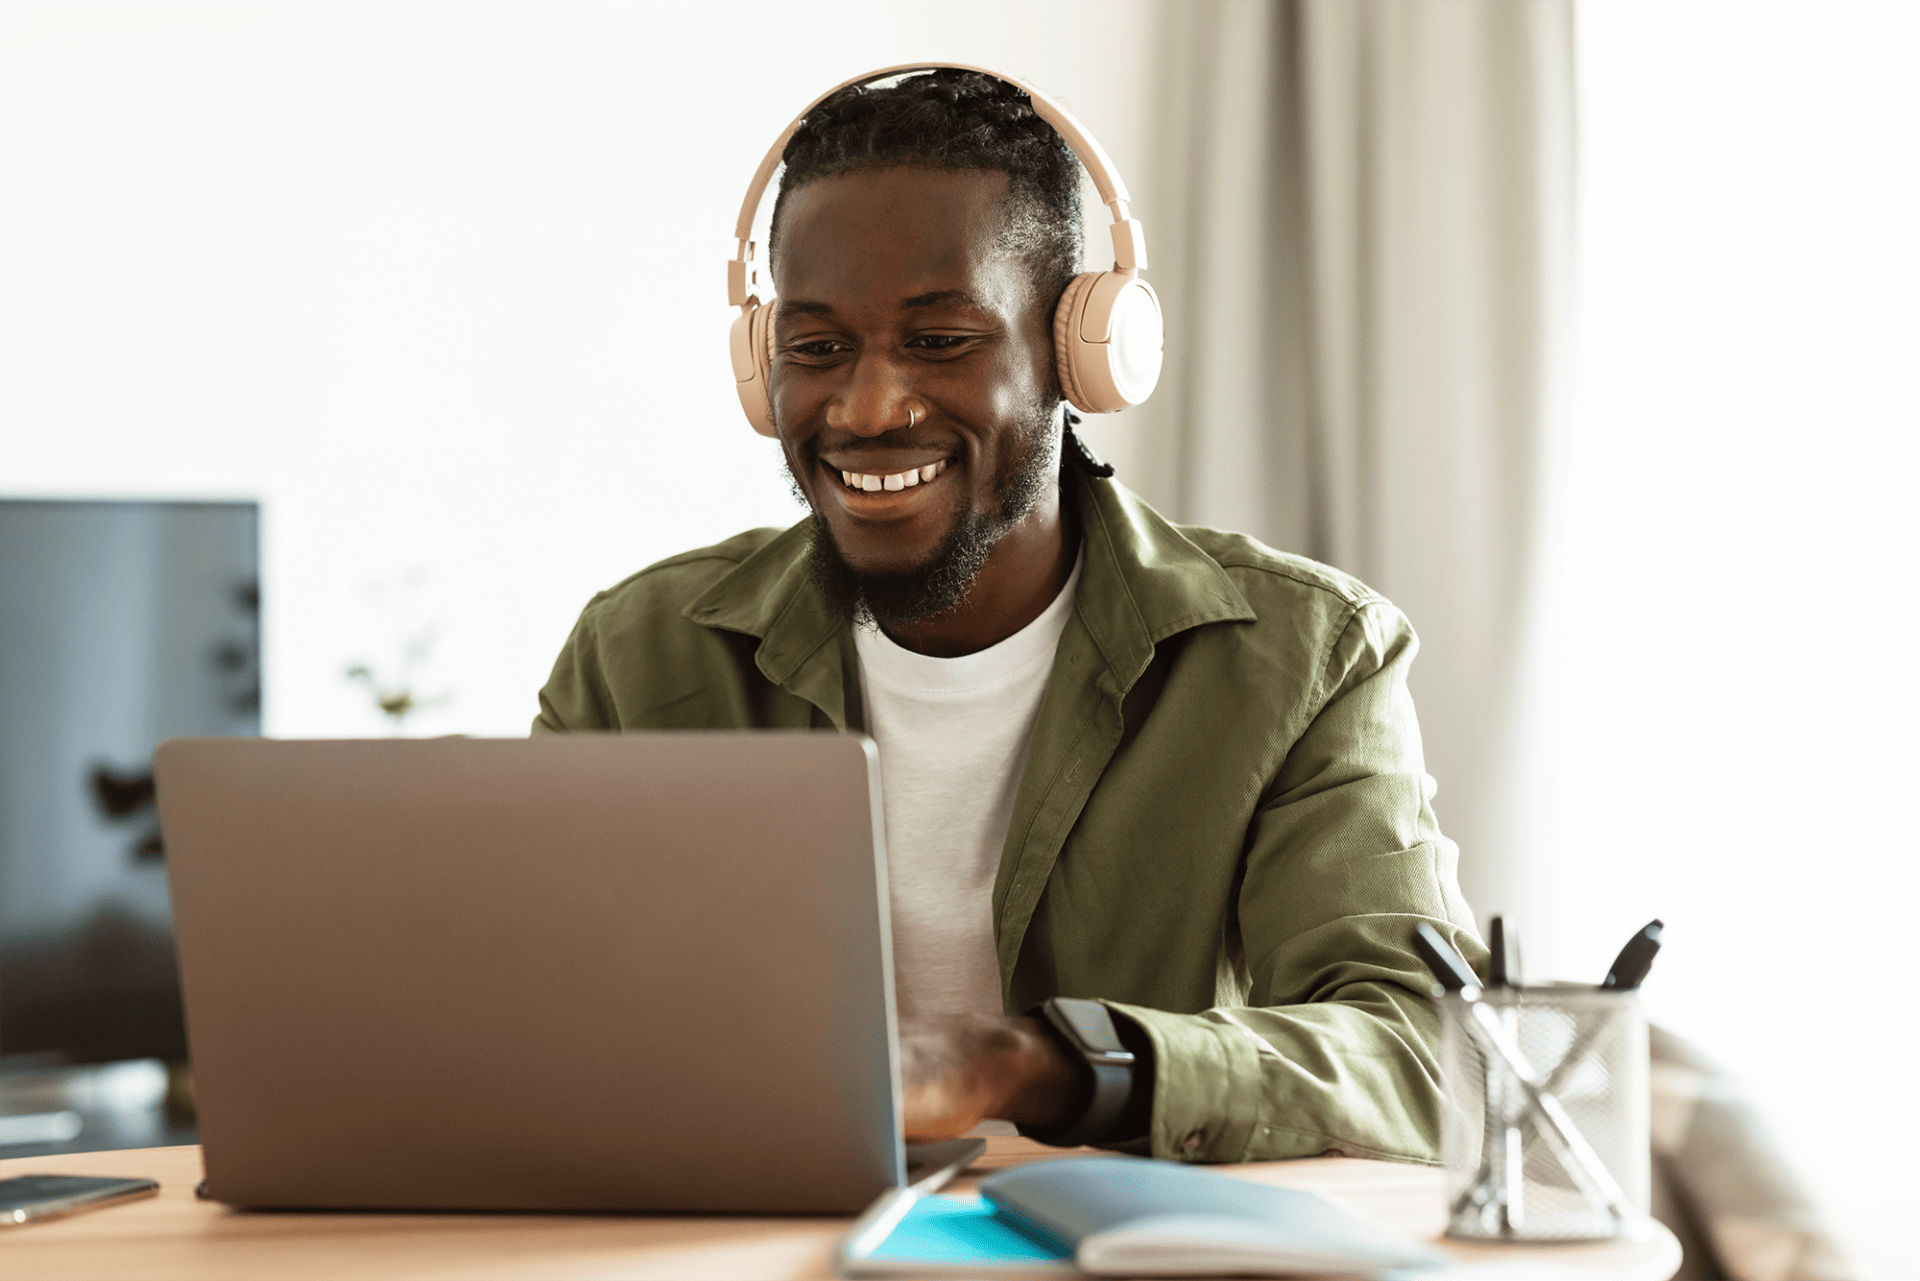 A smiling black man wearing headphones uses a laptop at a desk with office supplies and a monitor in the background, possibly engaging in Amplify Tutoring sessions.